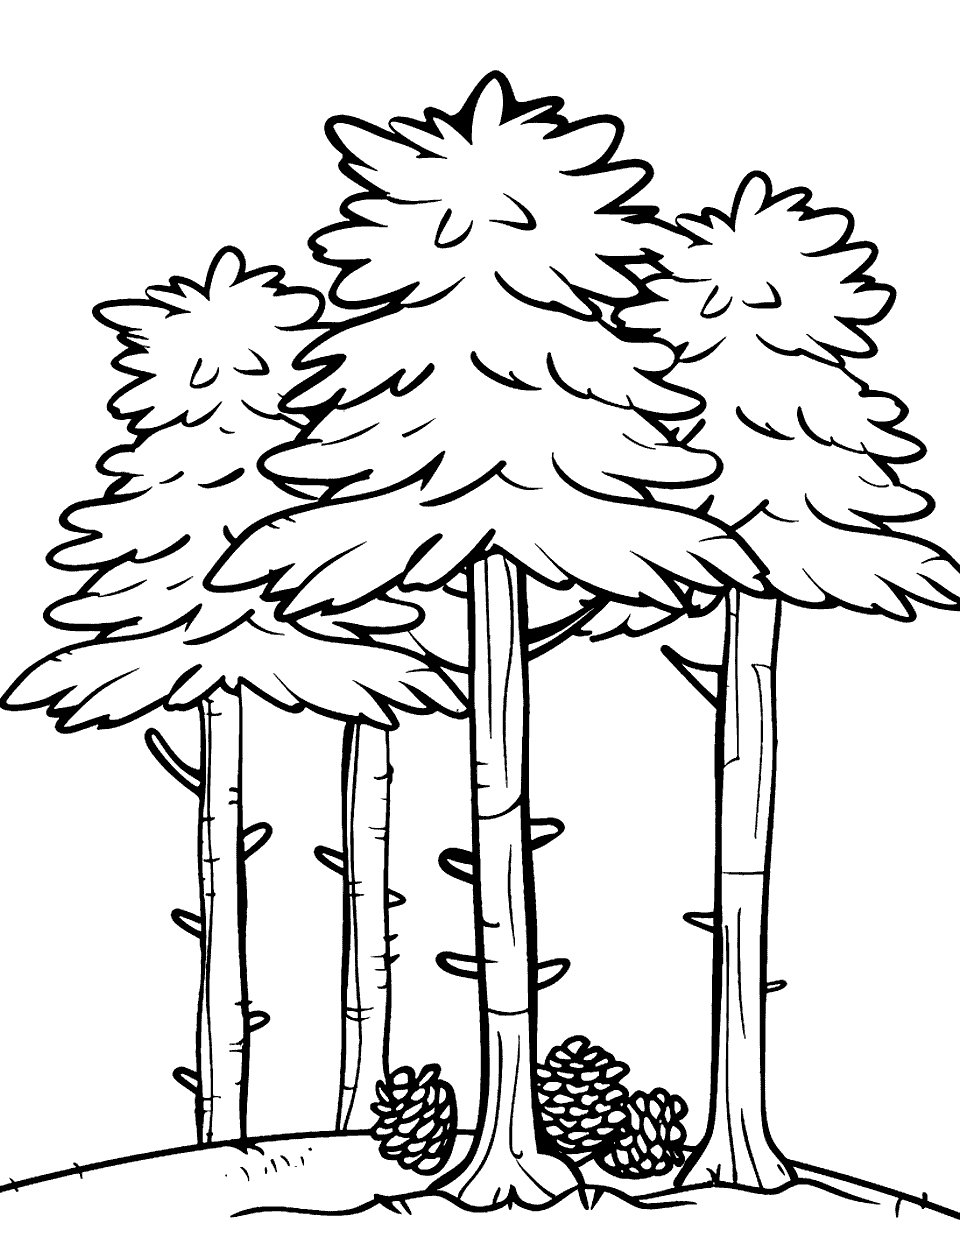 Pine Tree Forest Coloring Page - A group of pine trees standing tall, with pinecones on the ground.